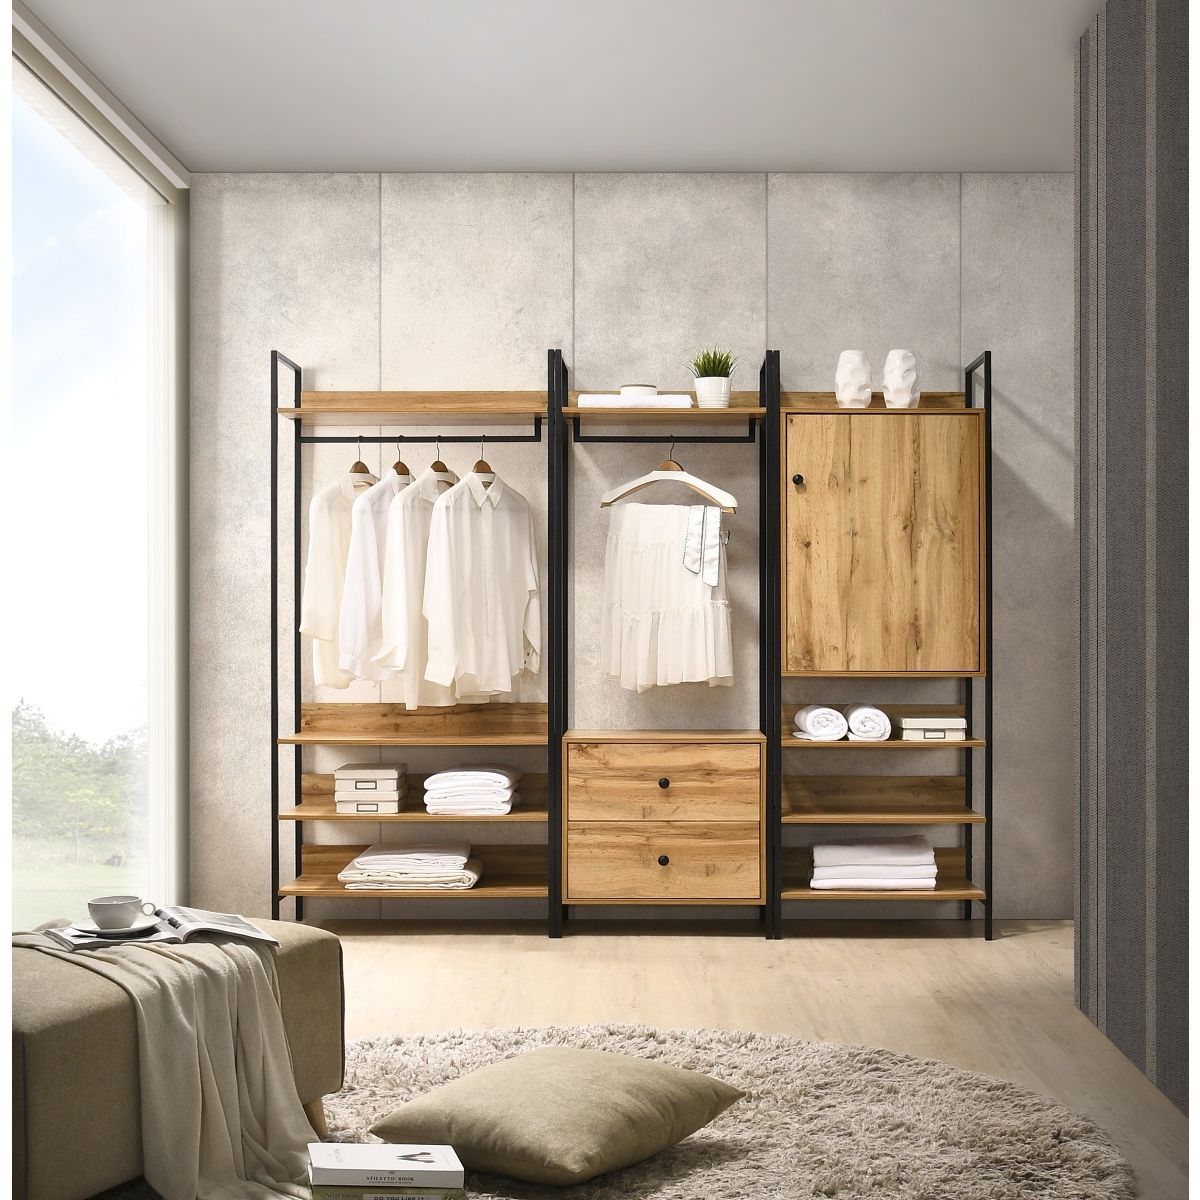 3 Piece Bedroom Furniture Set Open Wardrobes Throughout Wardrobes And Chest Of Drawers Combined (View 13 of 15)